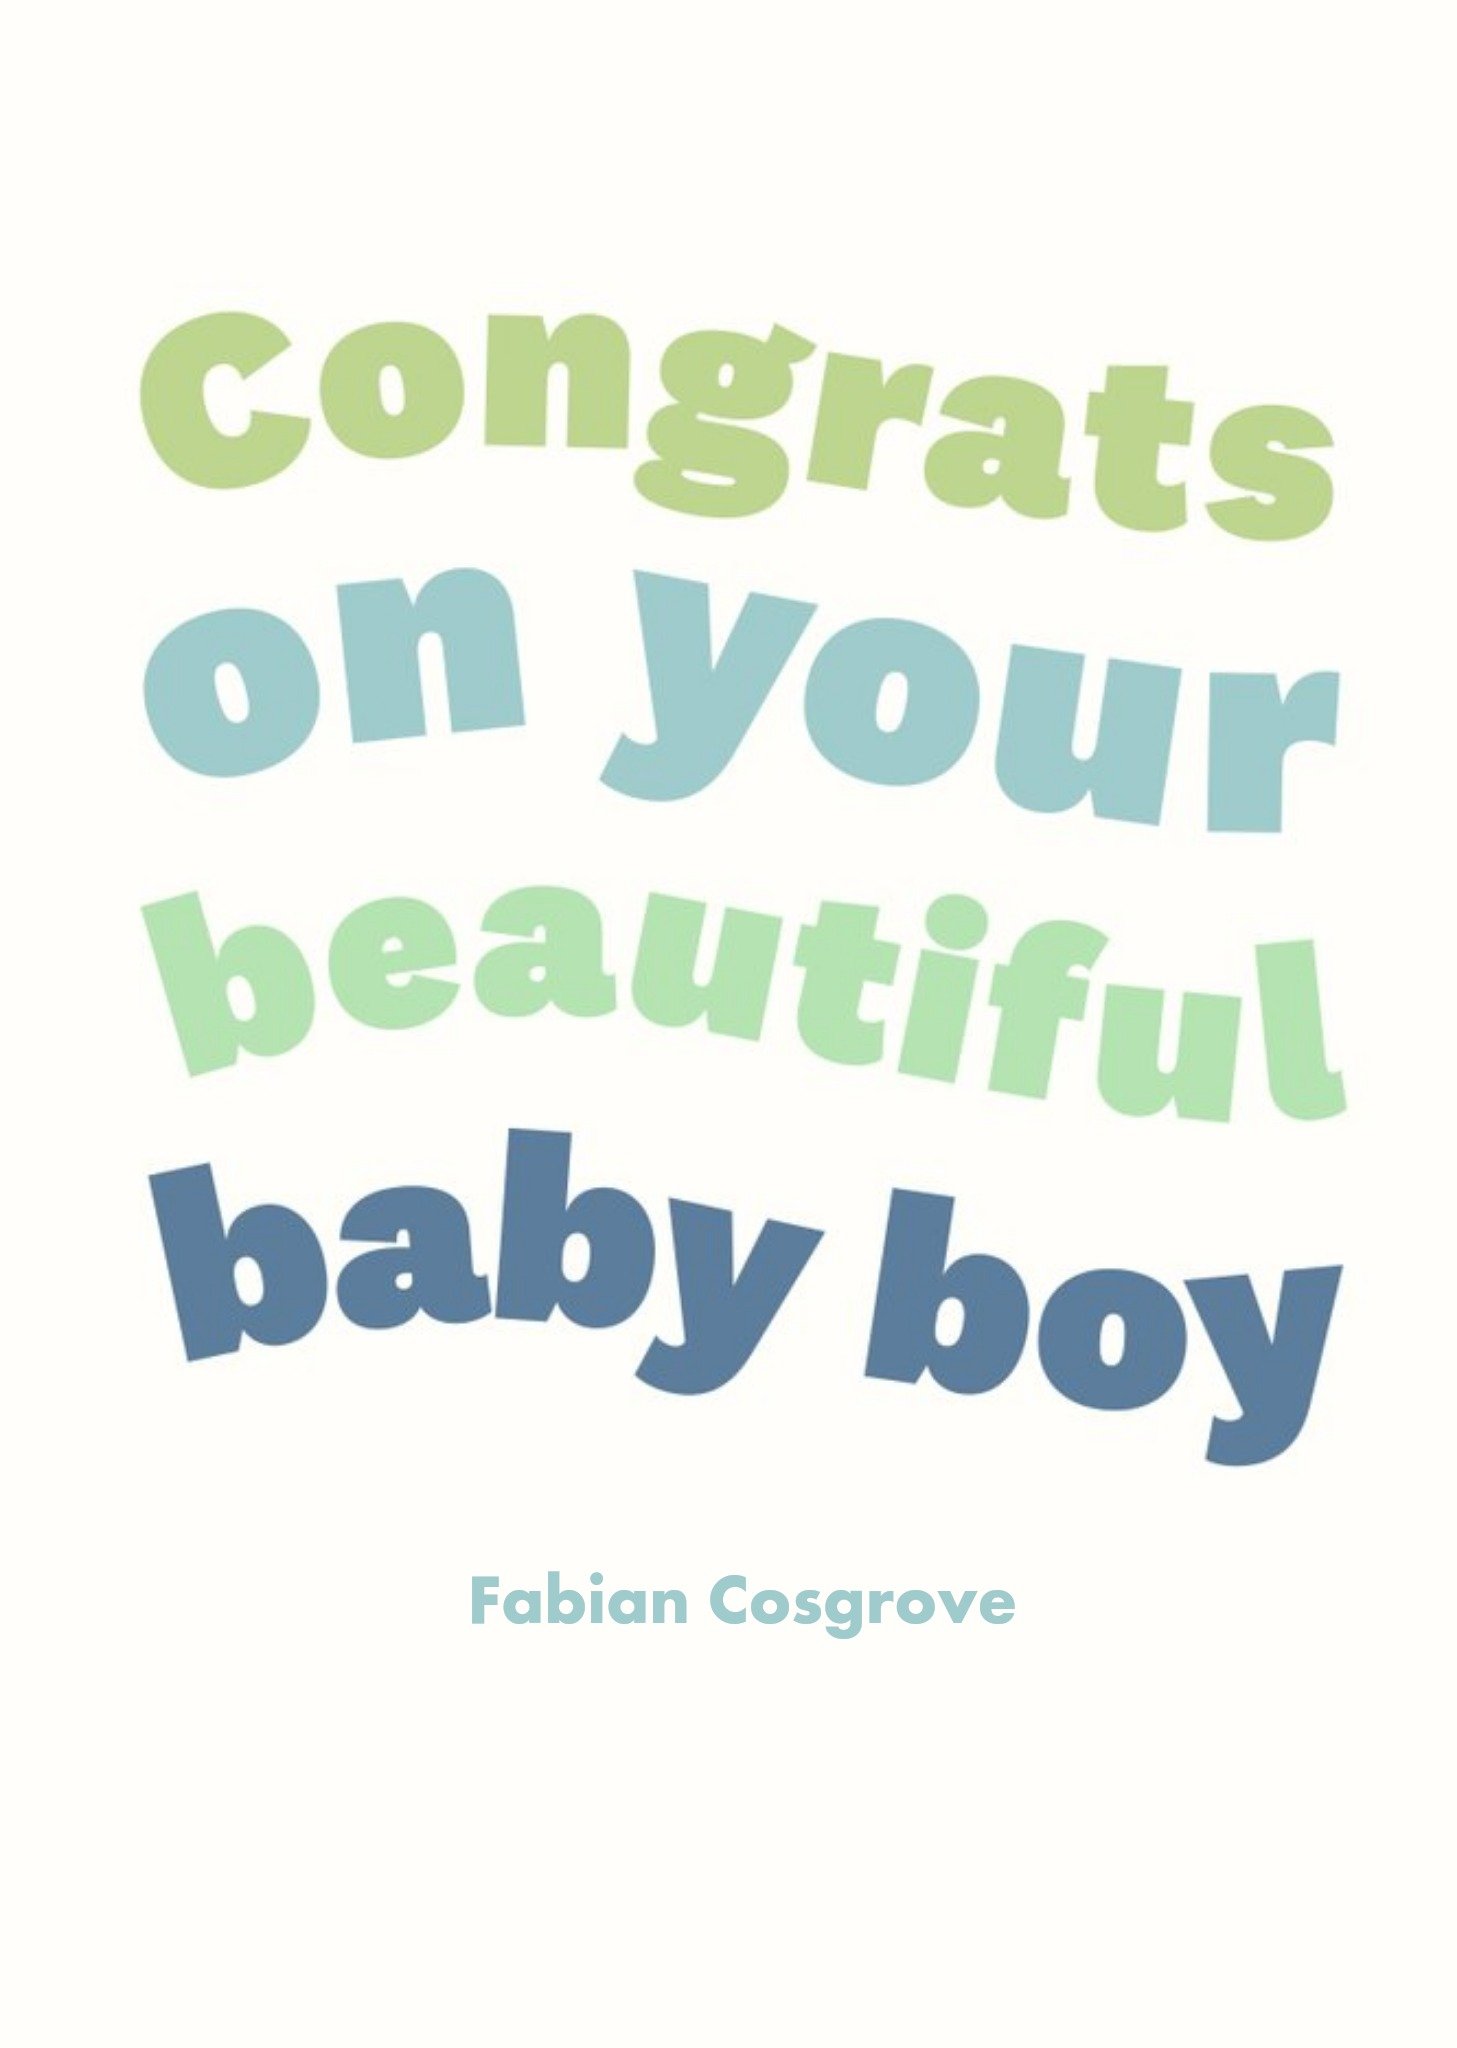 Moonpig Colourful And Wavy Typography On A Cream Background New Baby Boy Congratulations Card Ecard